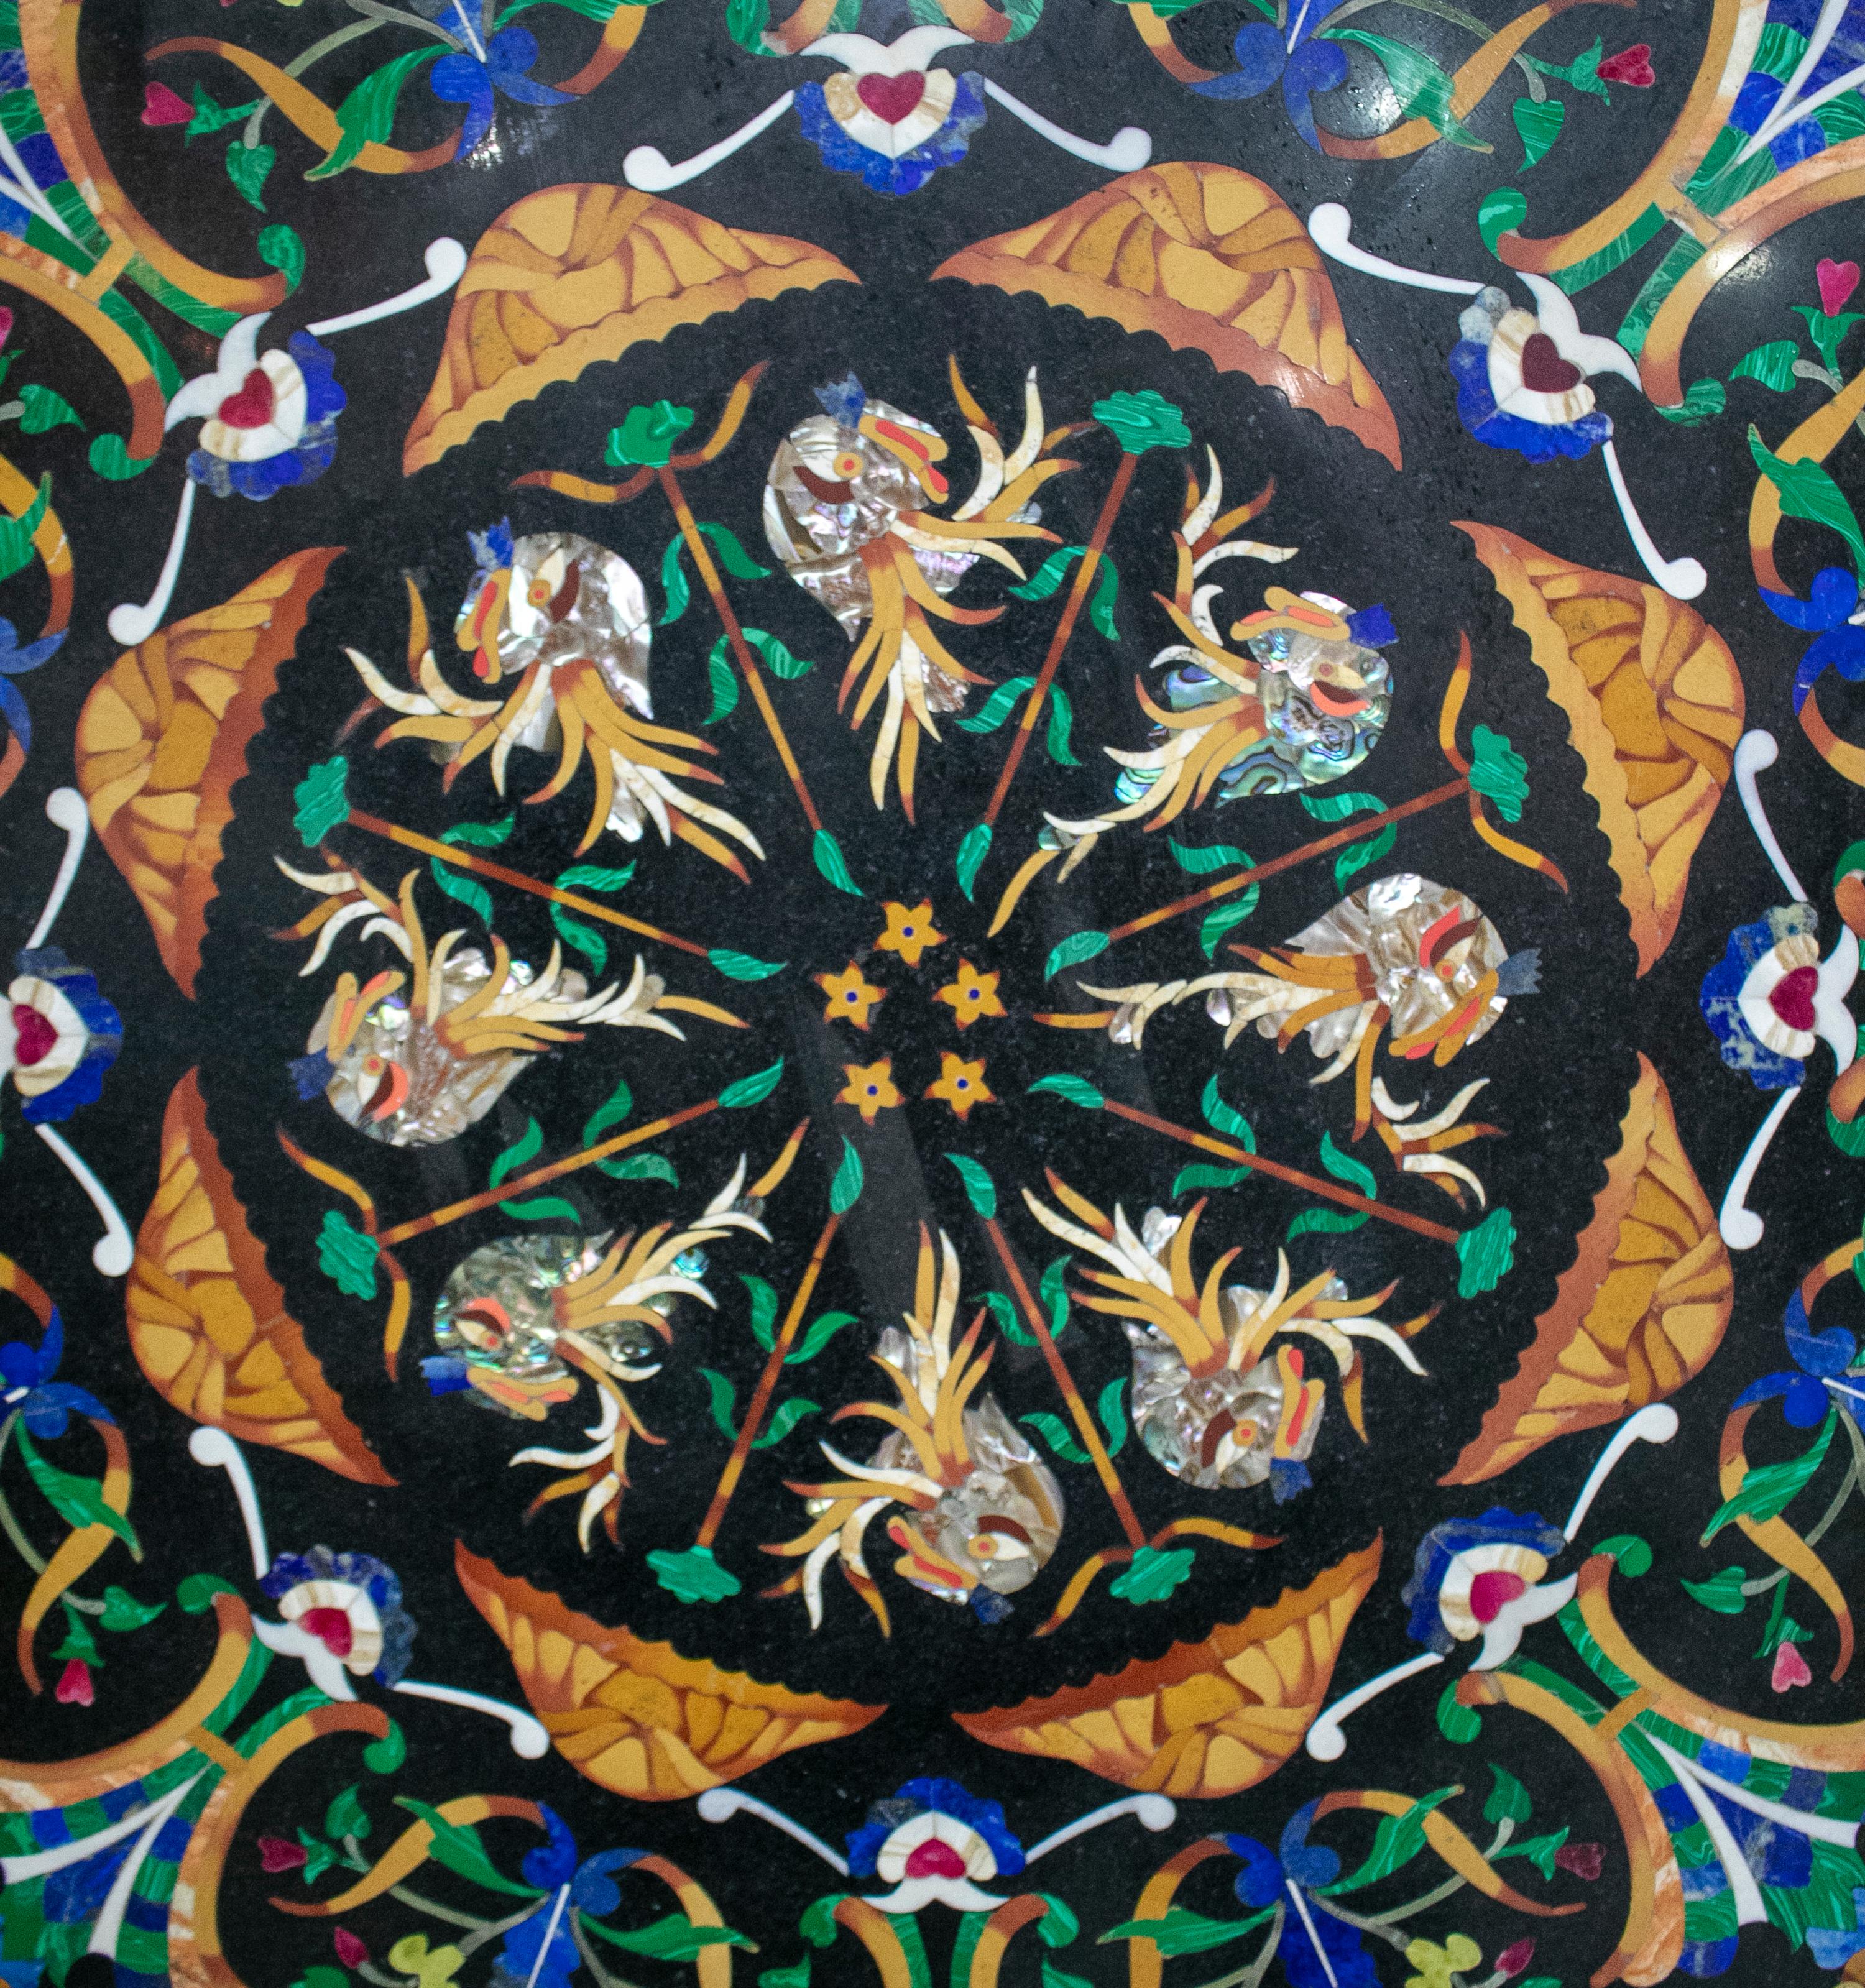 Octagonal Belgian black marble table top profusely decorated with Italian Pietre Dure mosaic inlays using green malachite, dark blue lapis, light blue turquoise, light green jade, mother of pearl and other semiprecious stones and marbles. 


 